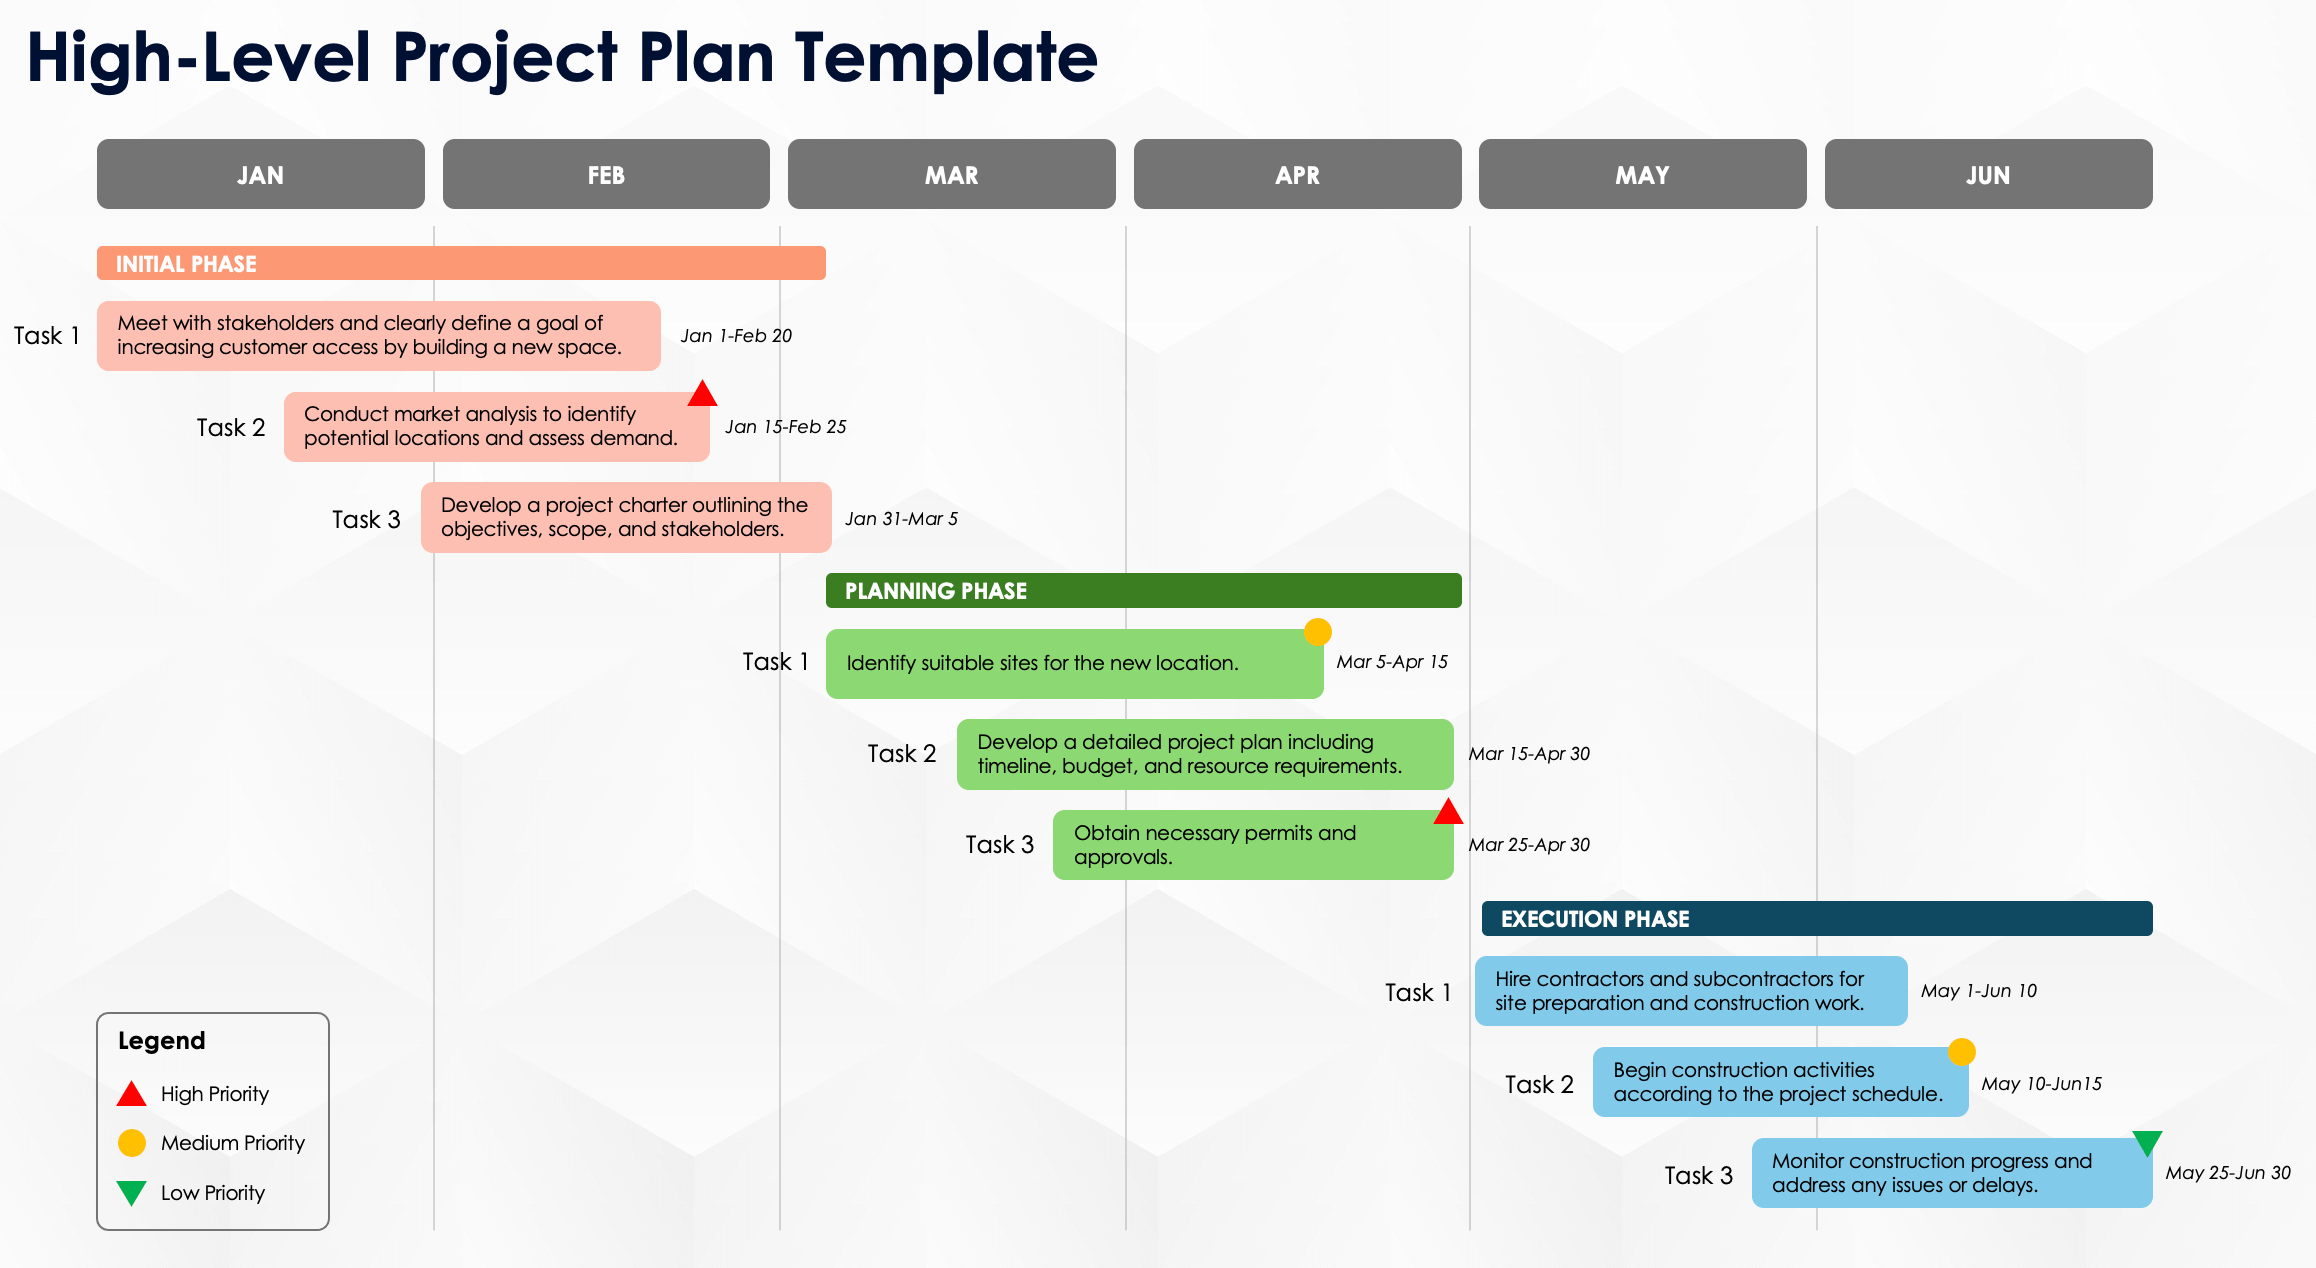 High Level Project Plan Template